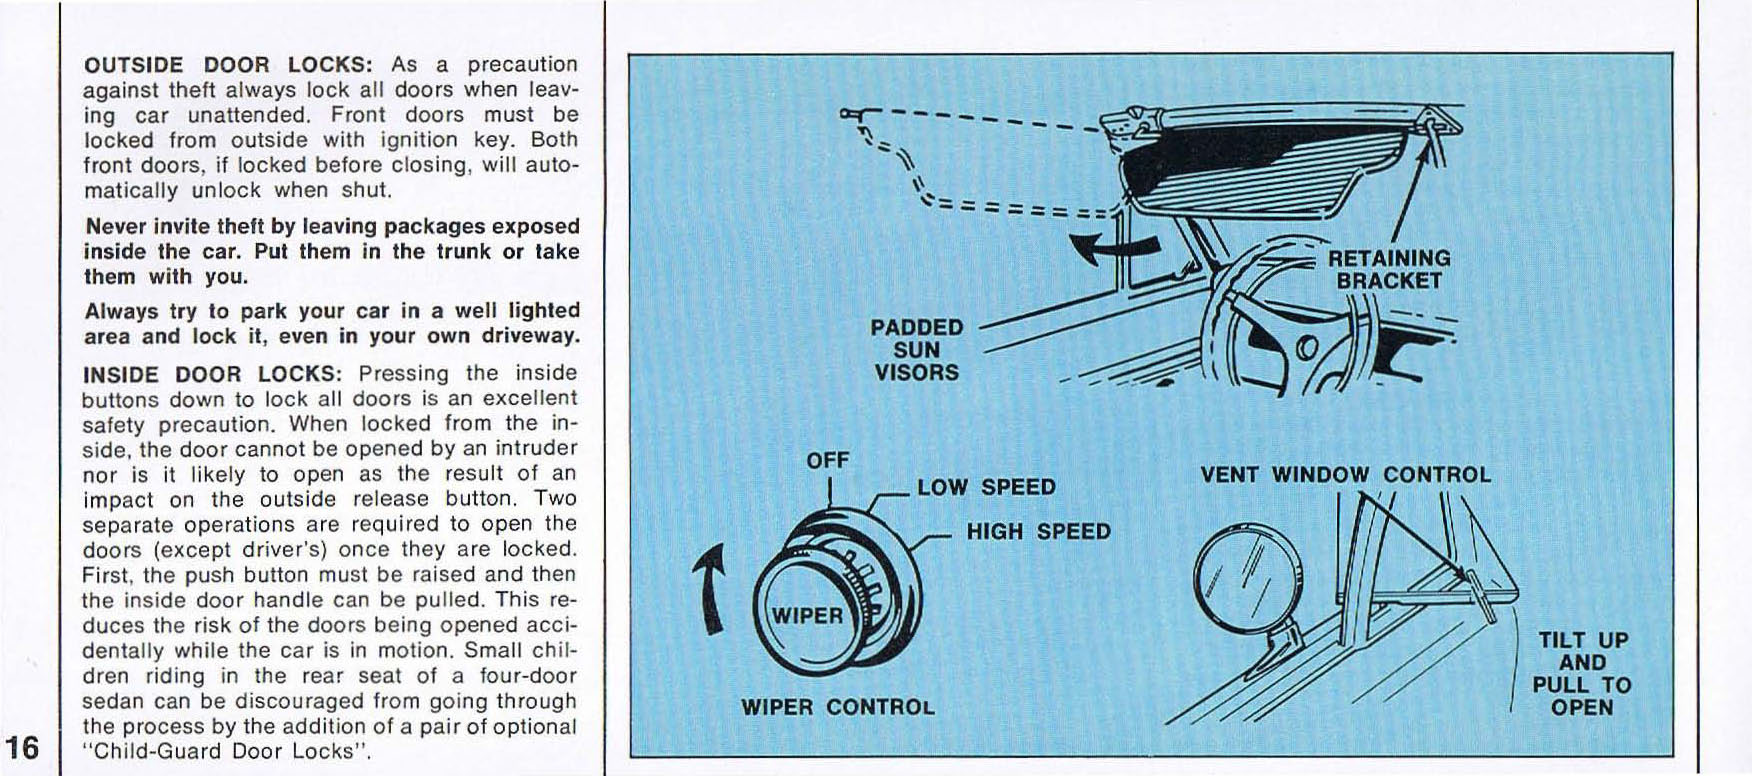 1969_Plymouth_Valiant_Owners_Manual-16